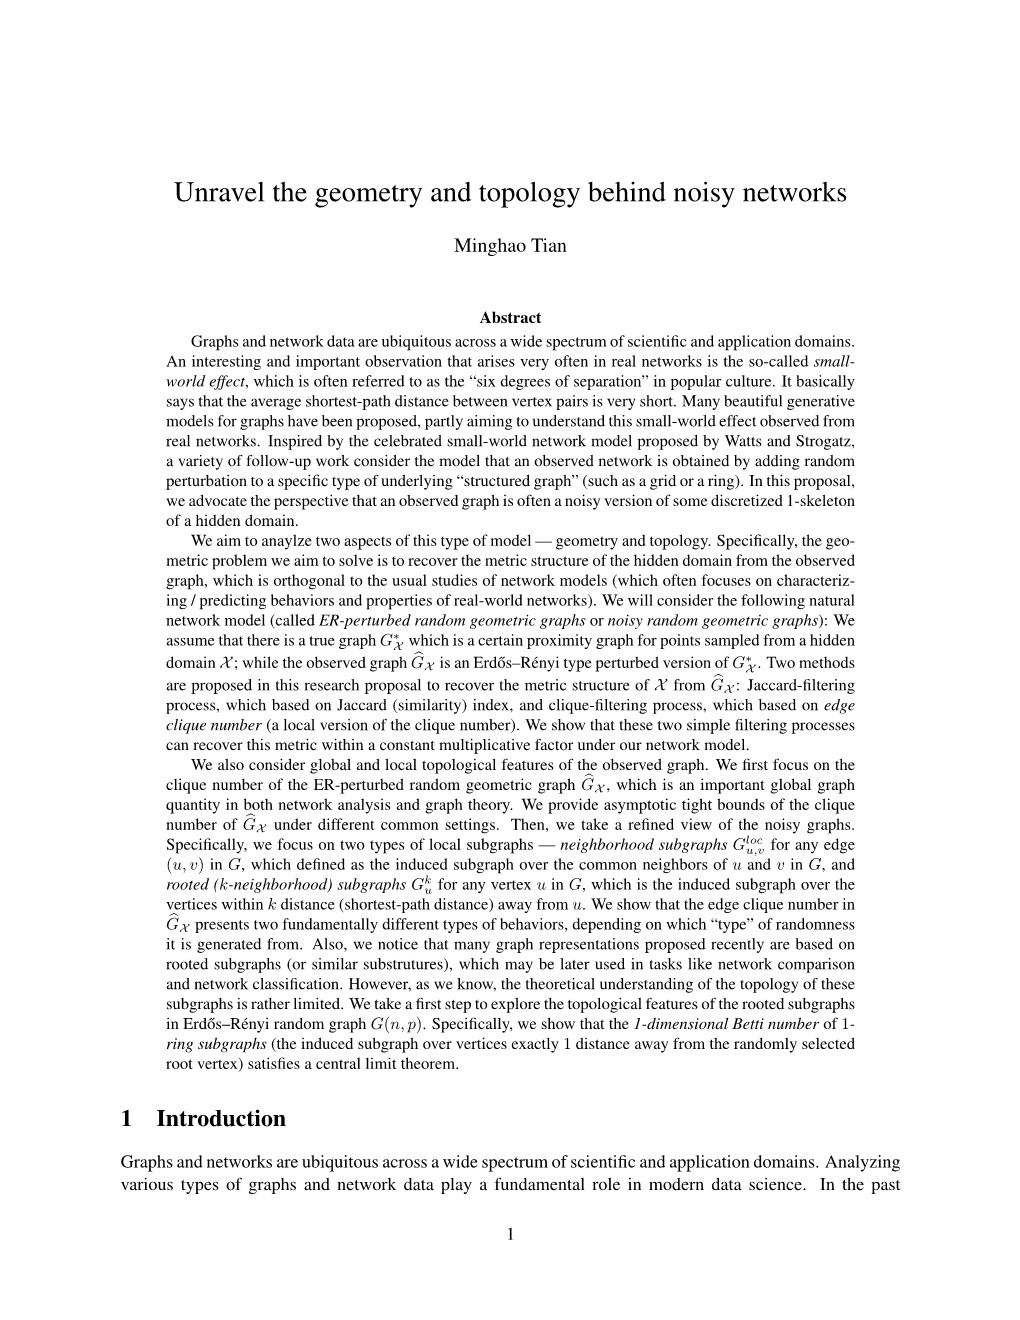 Unravel the Geometry and Topology Behind Noisy Networks